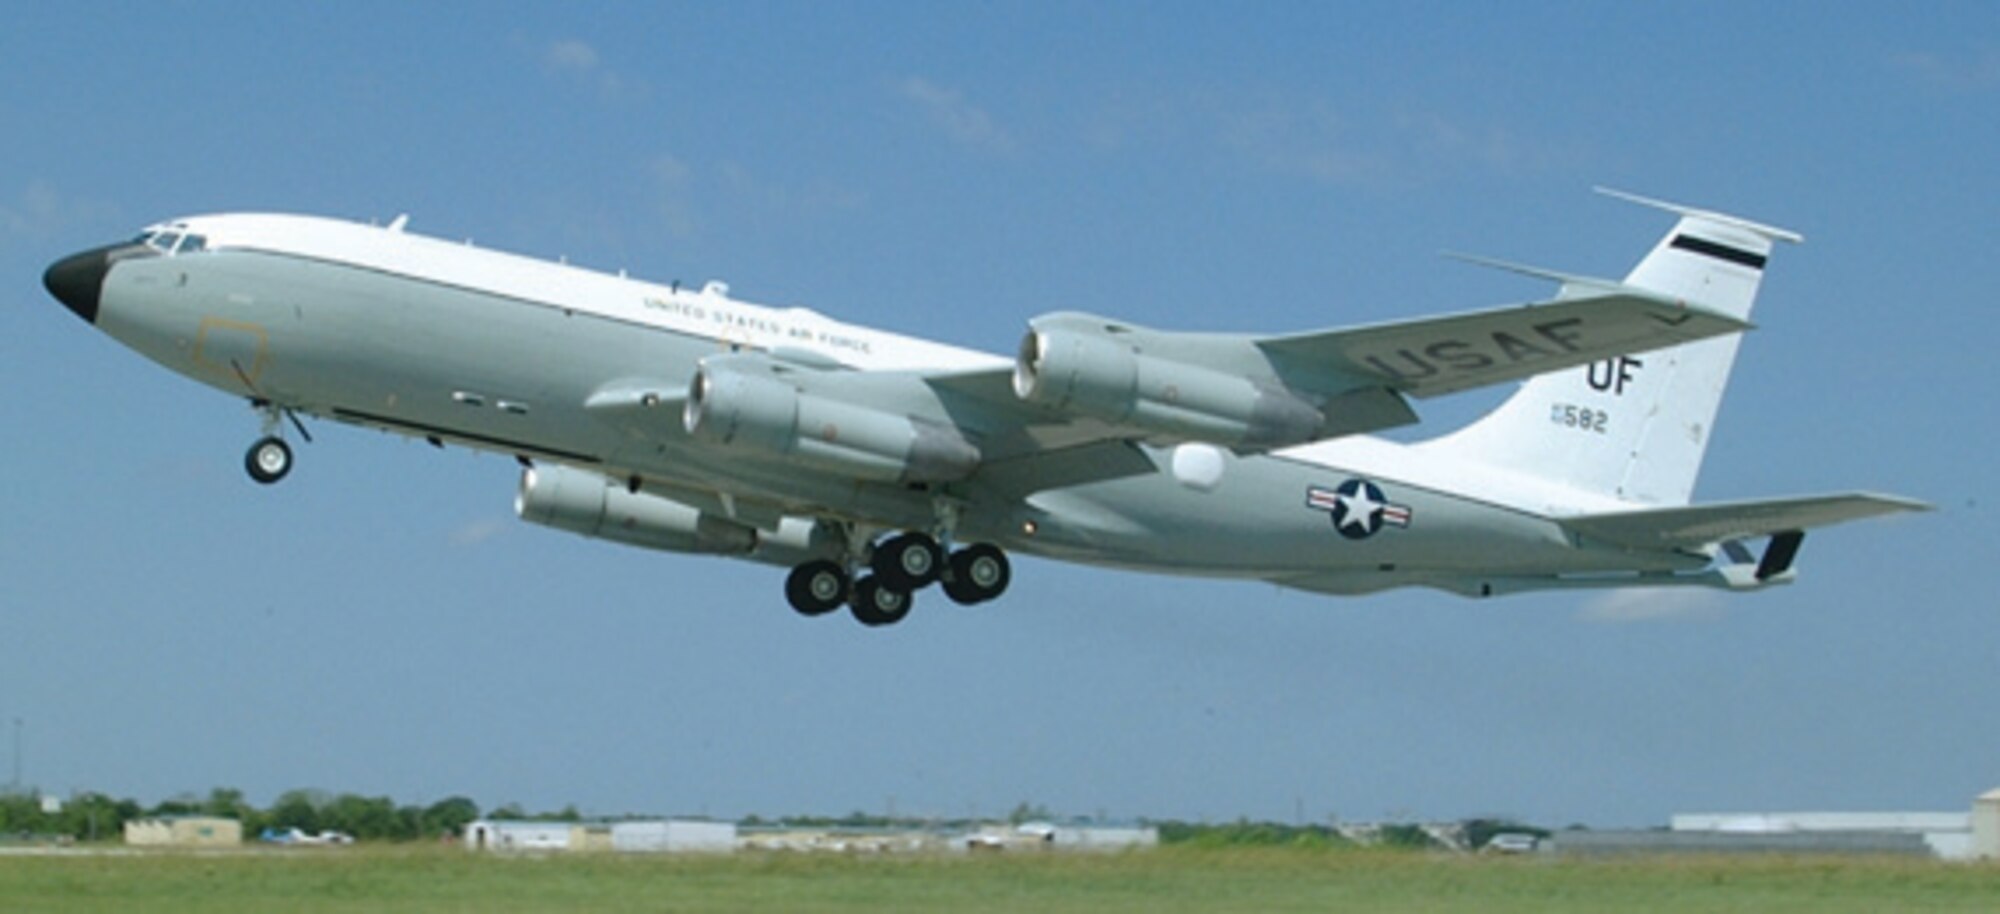 The WC-135 Constant Phoenix aircraft is a unique air sampling asset in the United States Air Force inventory. (U.S. Air Force photo by Staff Sgt. Michael Holland)